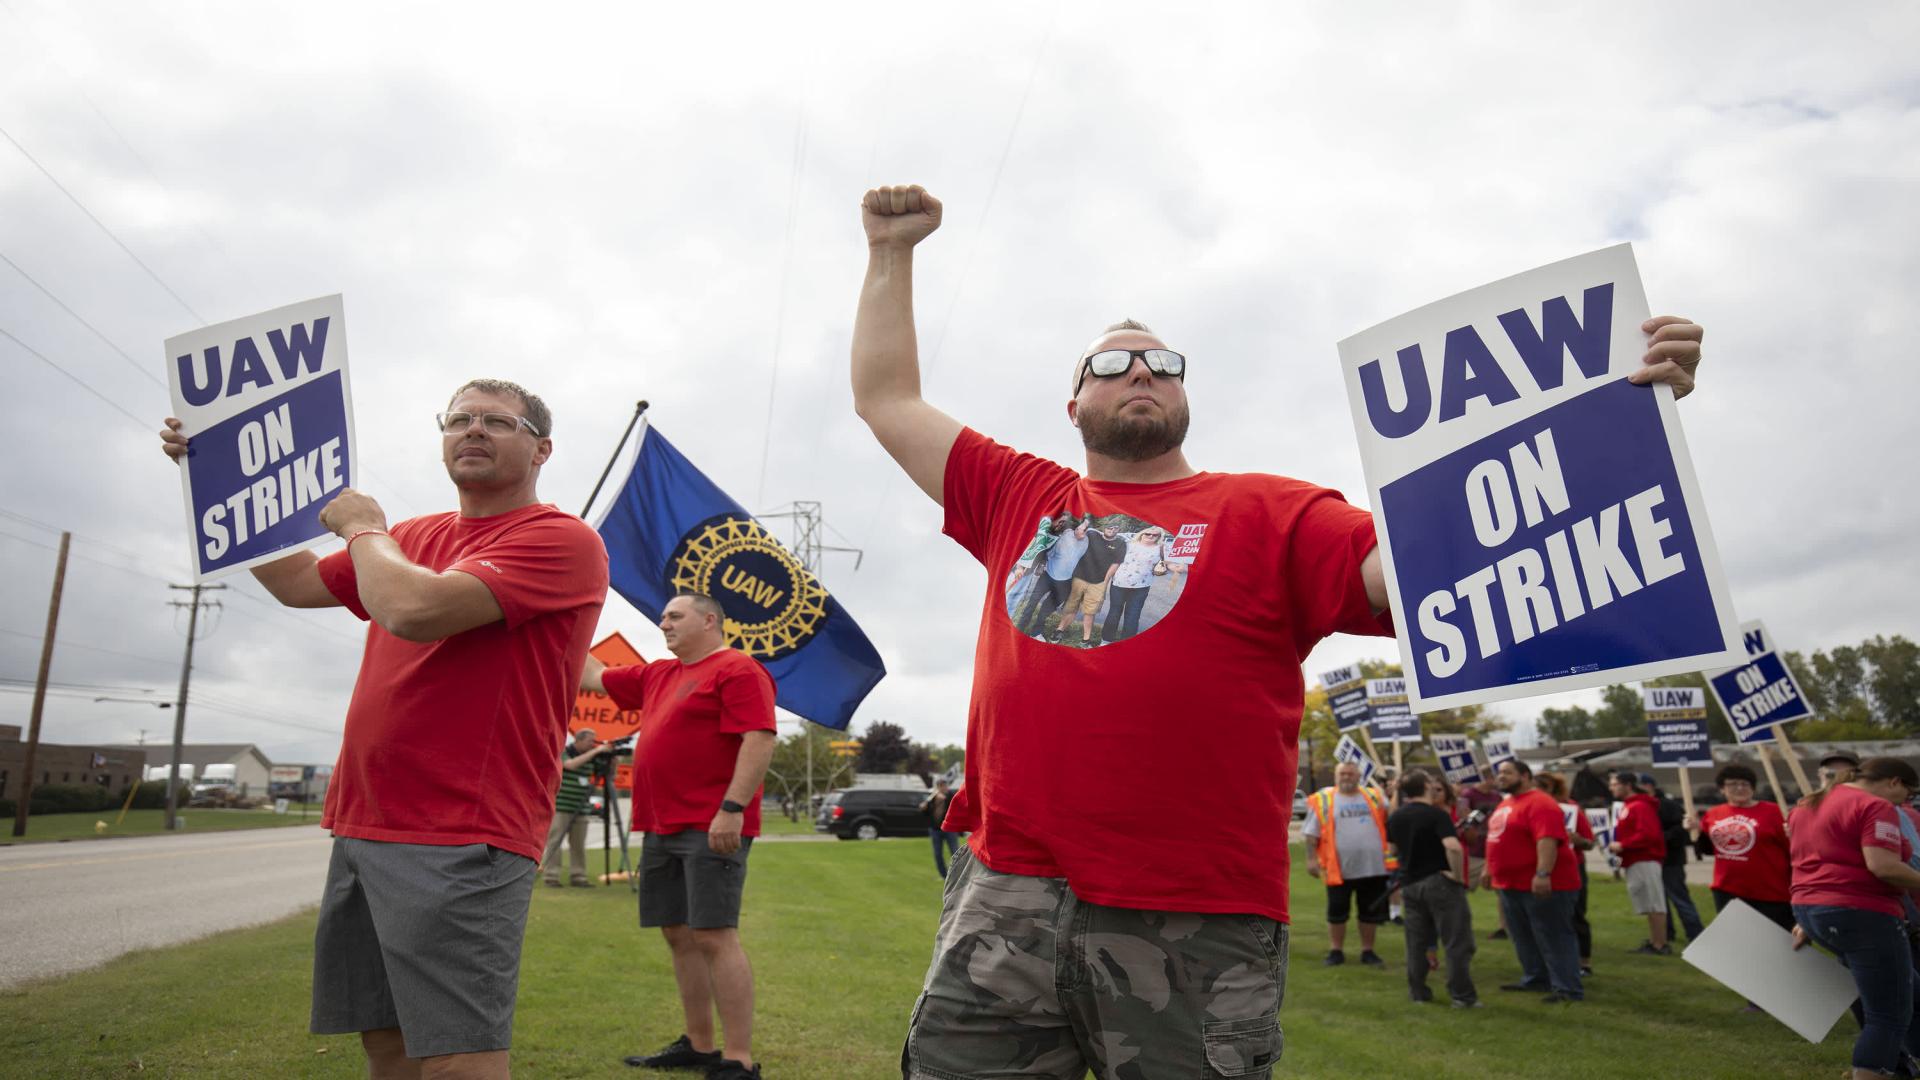 GM says union labor deals will increase costs by $9.3 billion